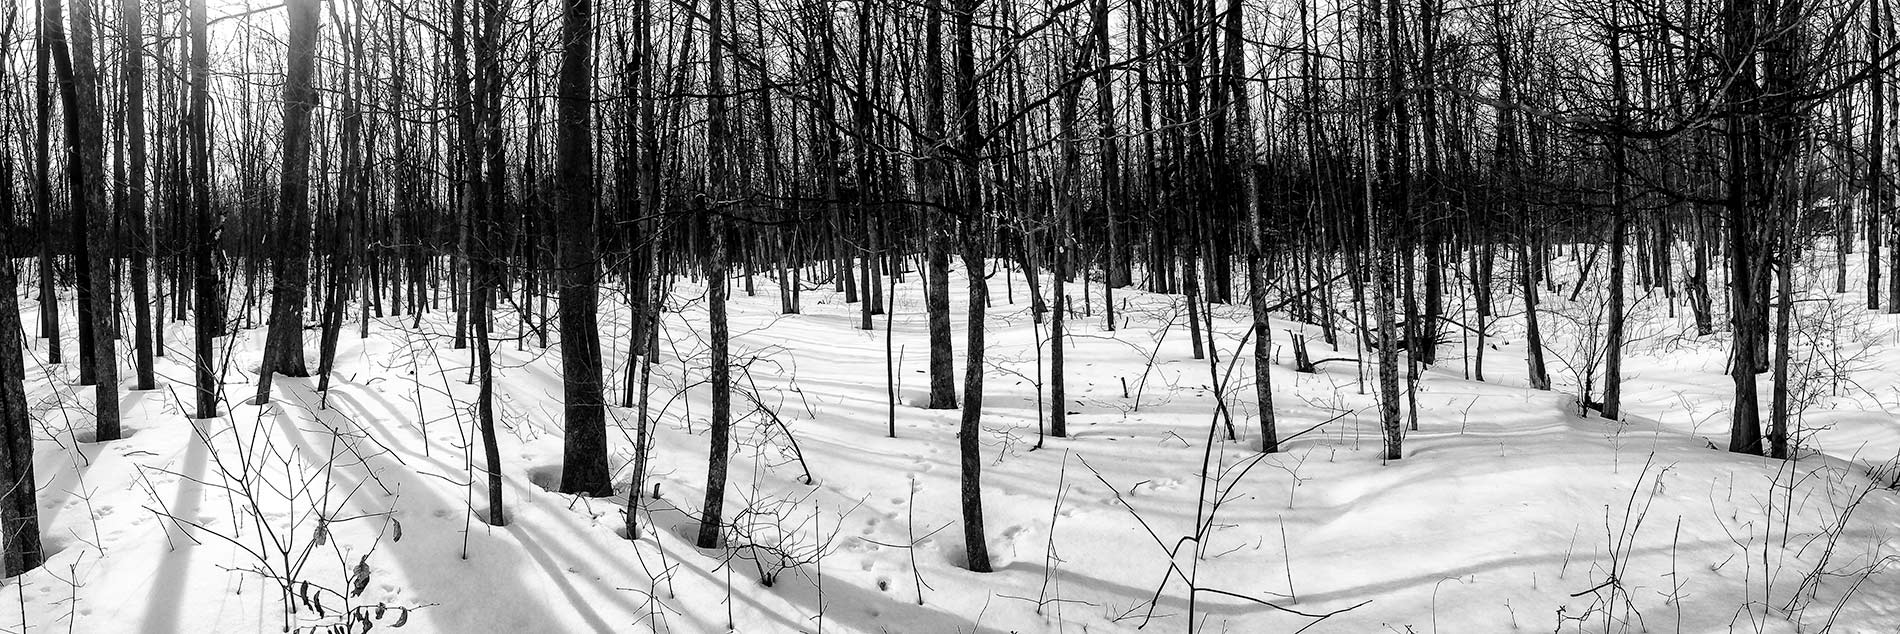 Panorama snow forest b&w